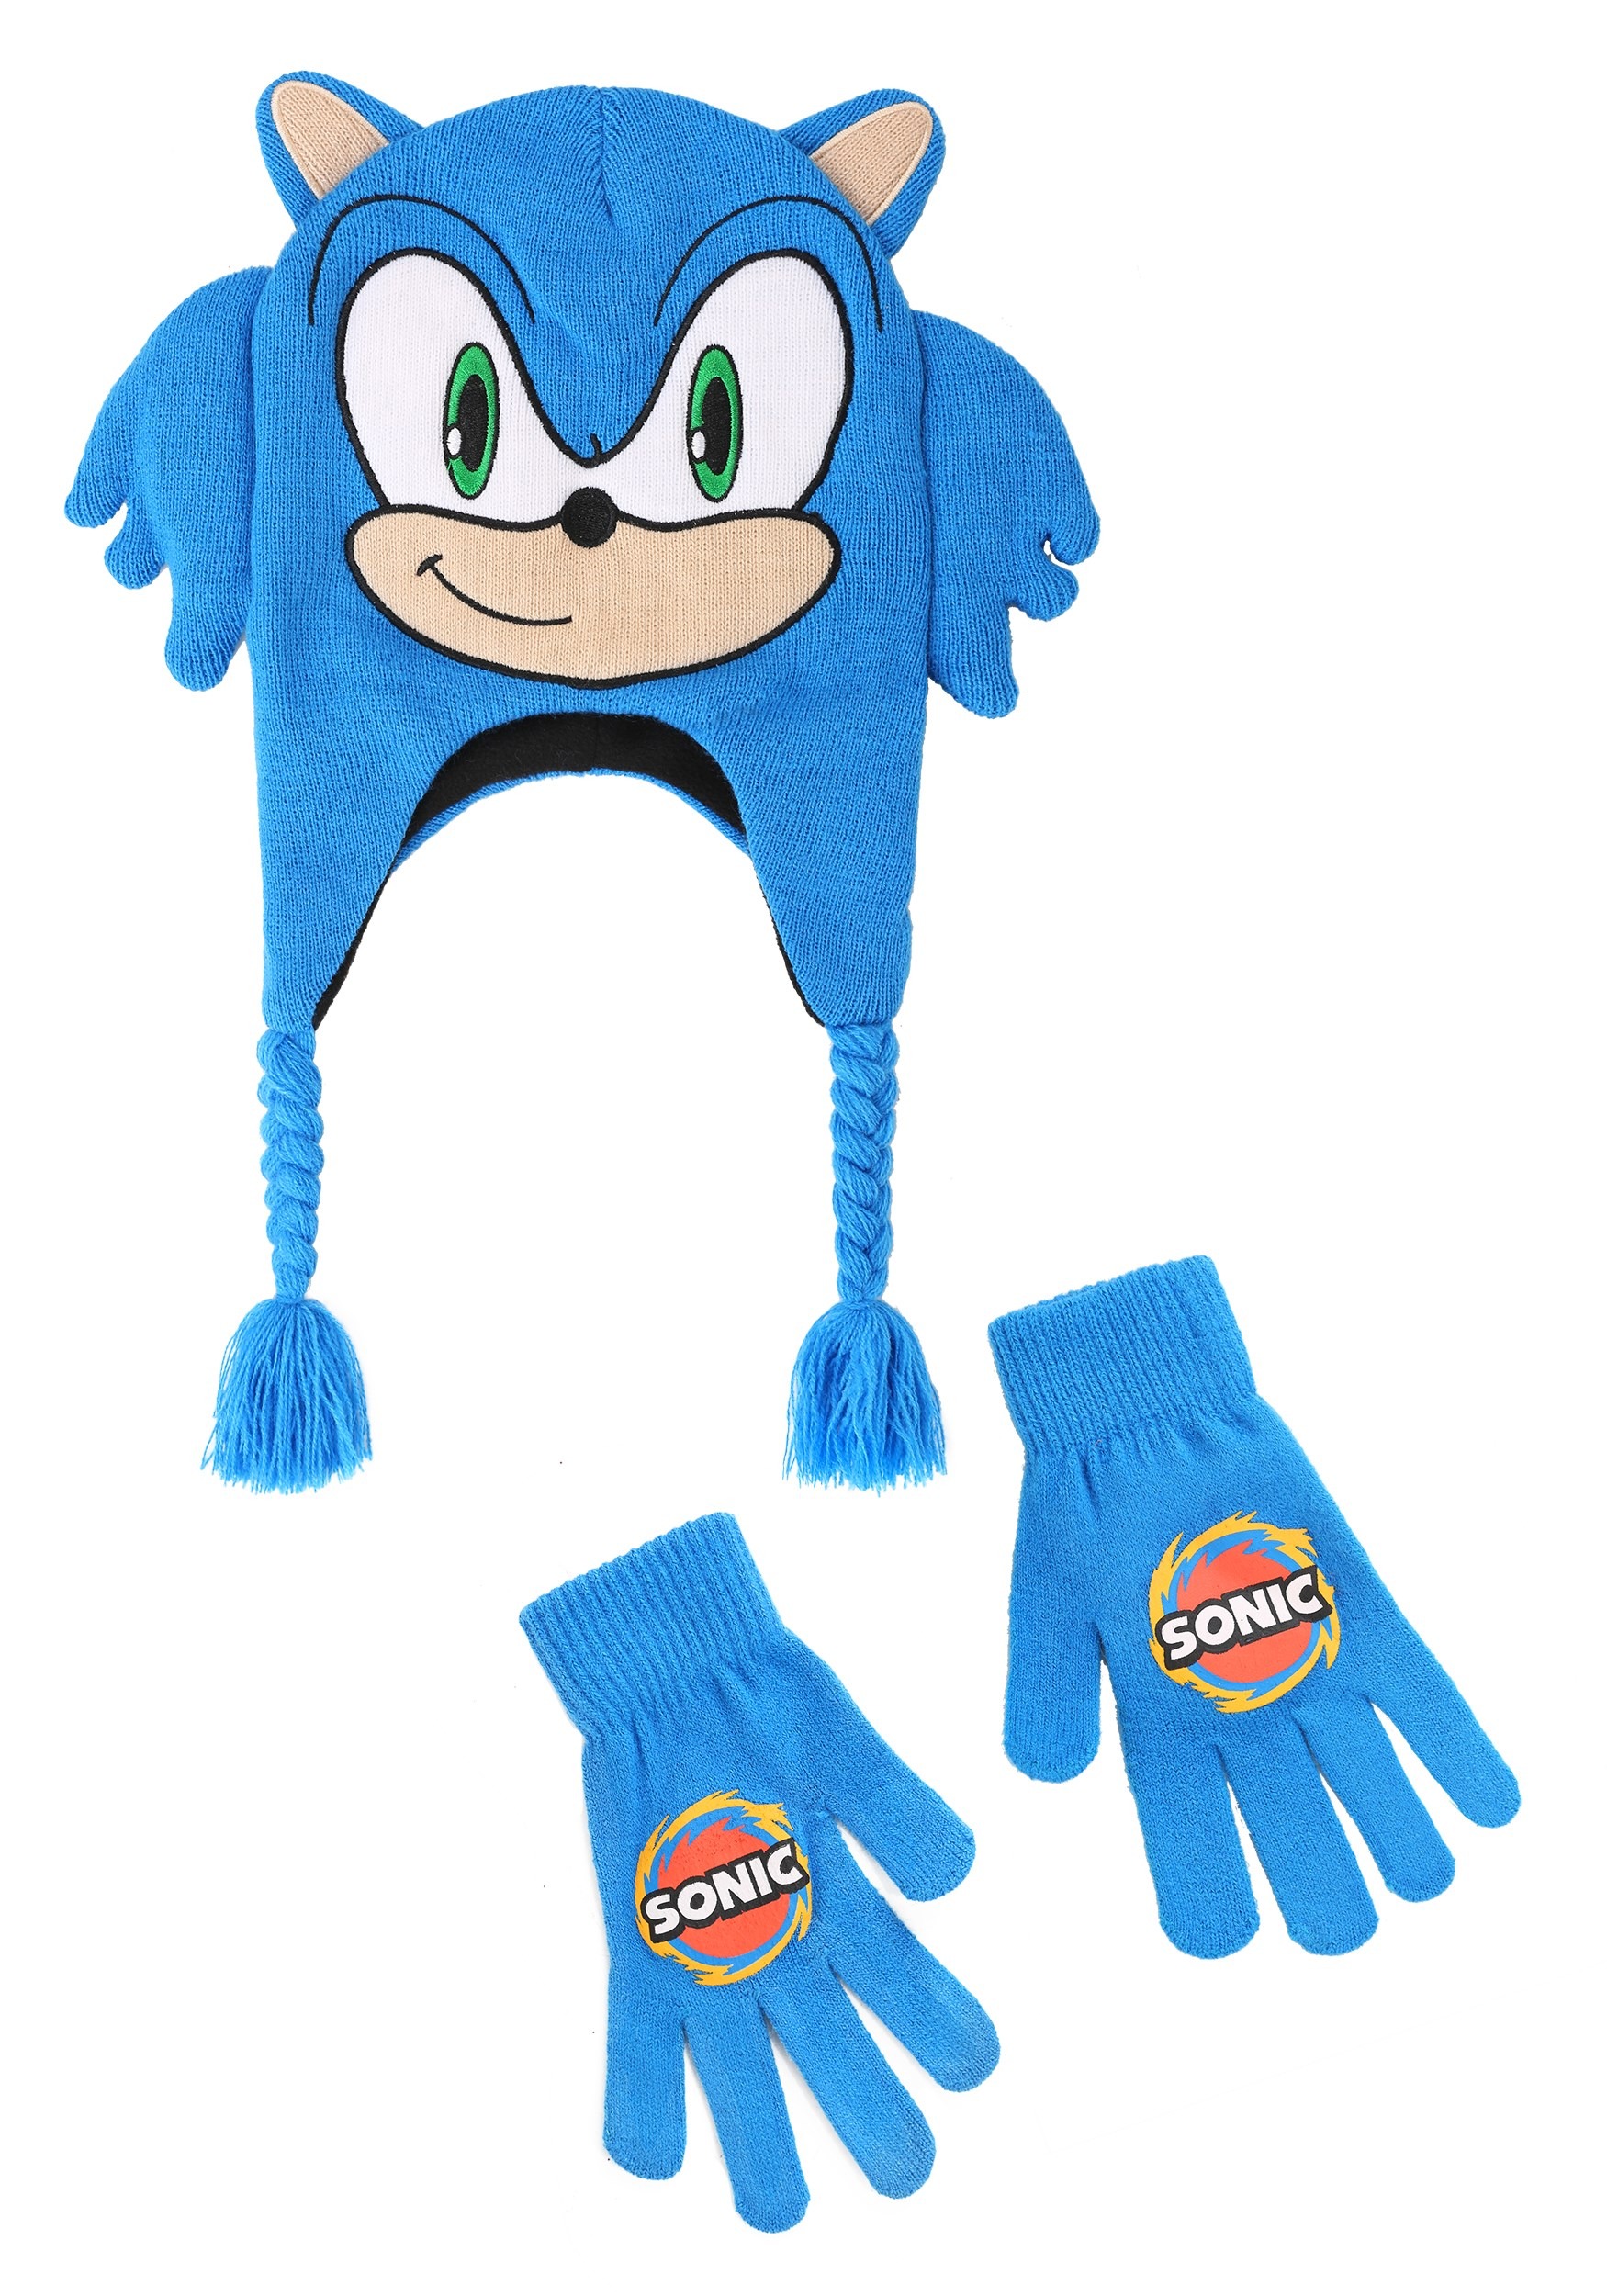 Sonic the Hedgehog Peruvian Hat and Glove Set